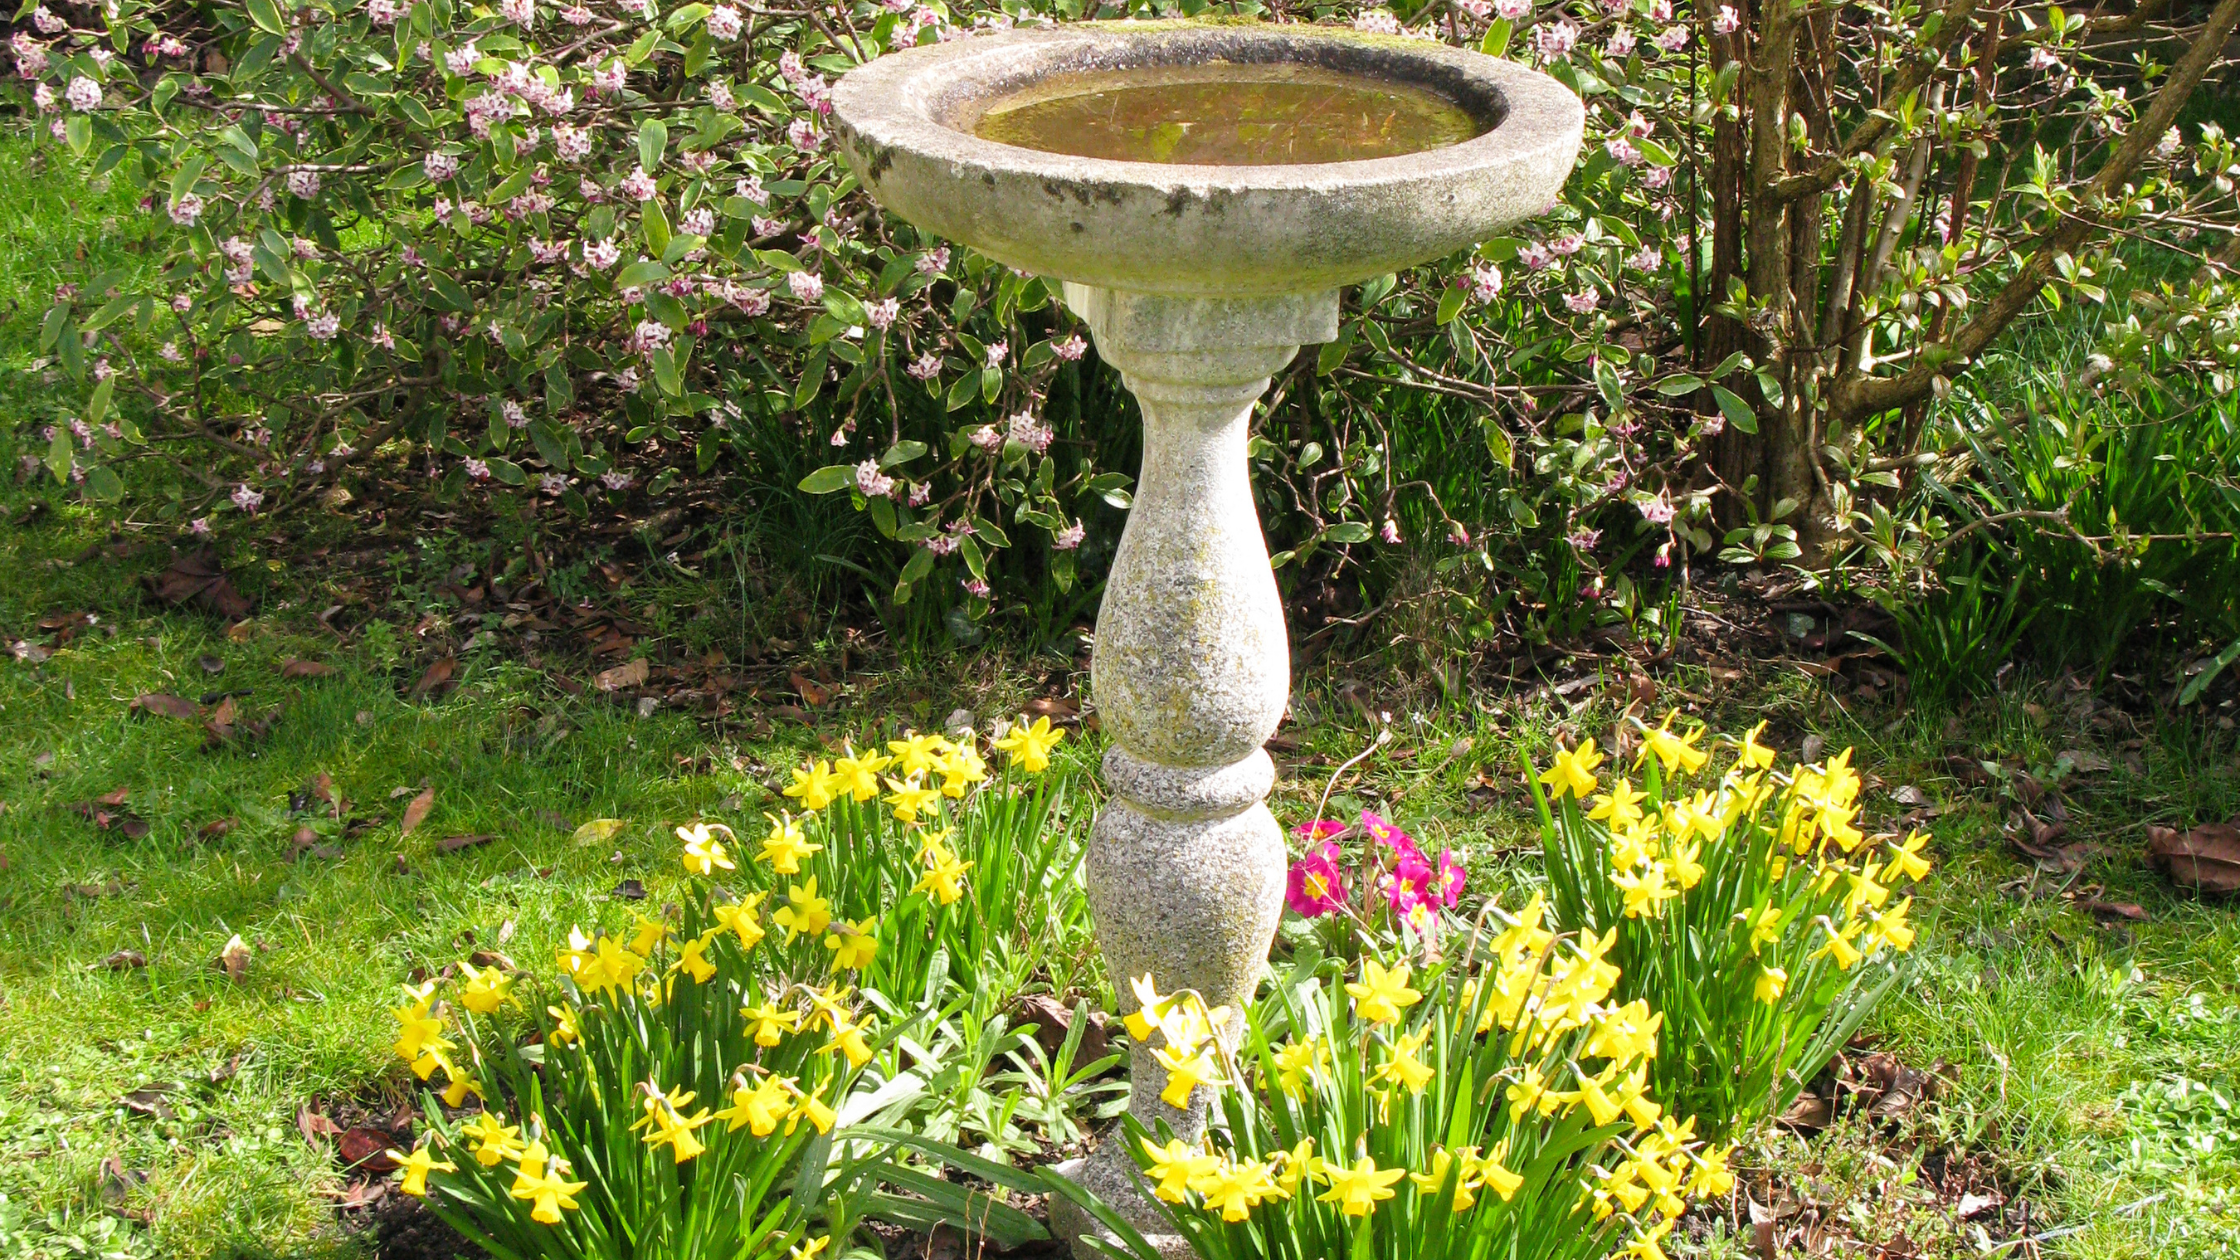 bird water fountain in the middle of a lush green garden